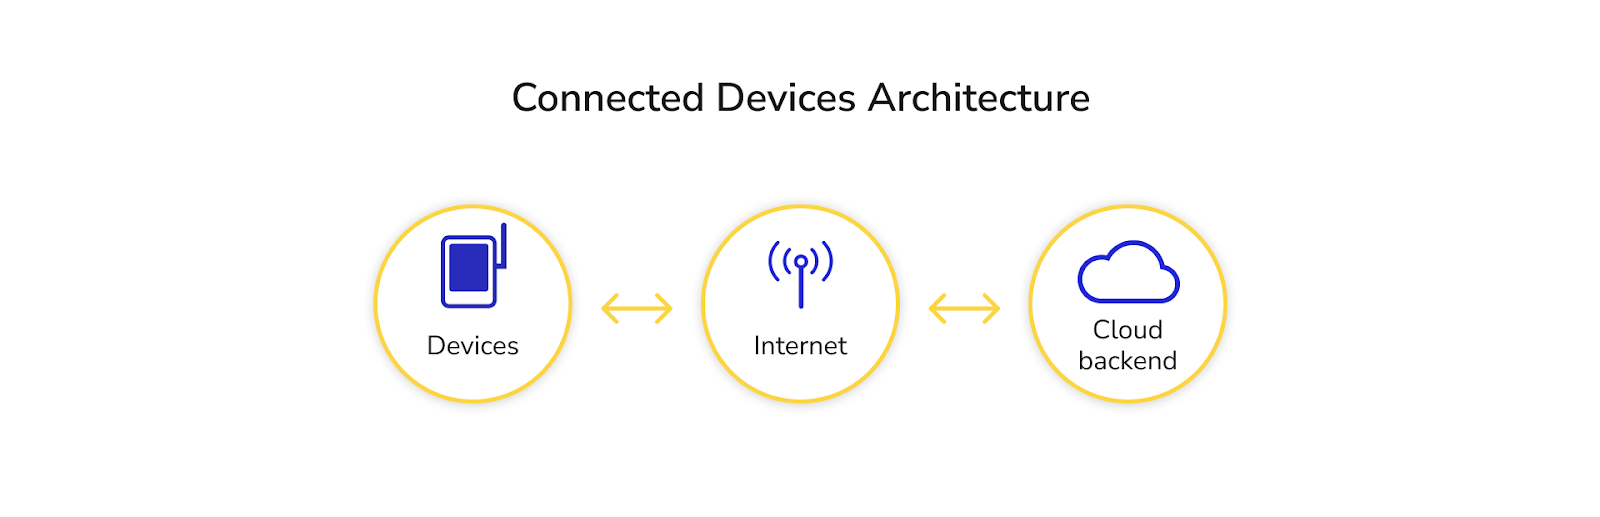 IoT architecture for connected devices